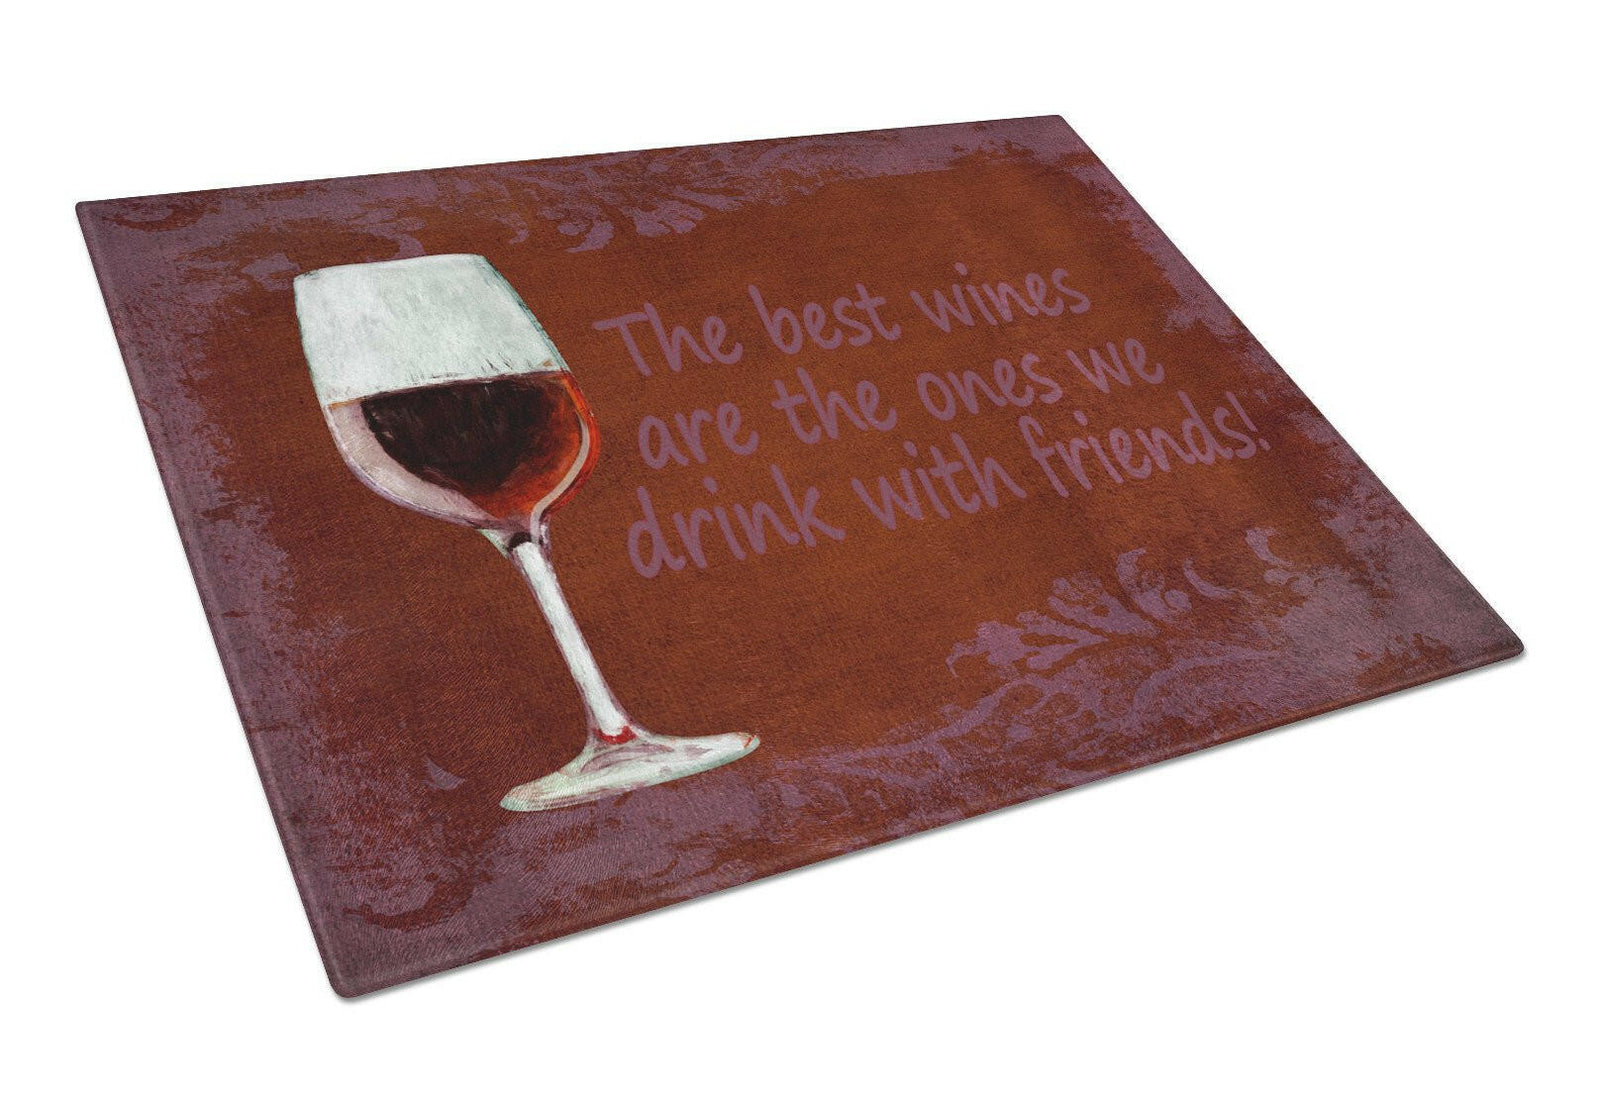 The best wines are the ones we drink with friends Glass Cutting Board Large Size SB3068LCB by Caroline's Treasures